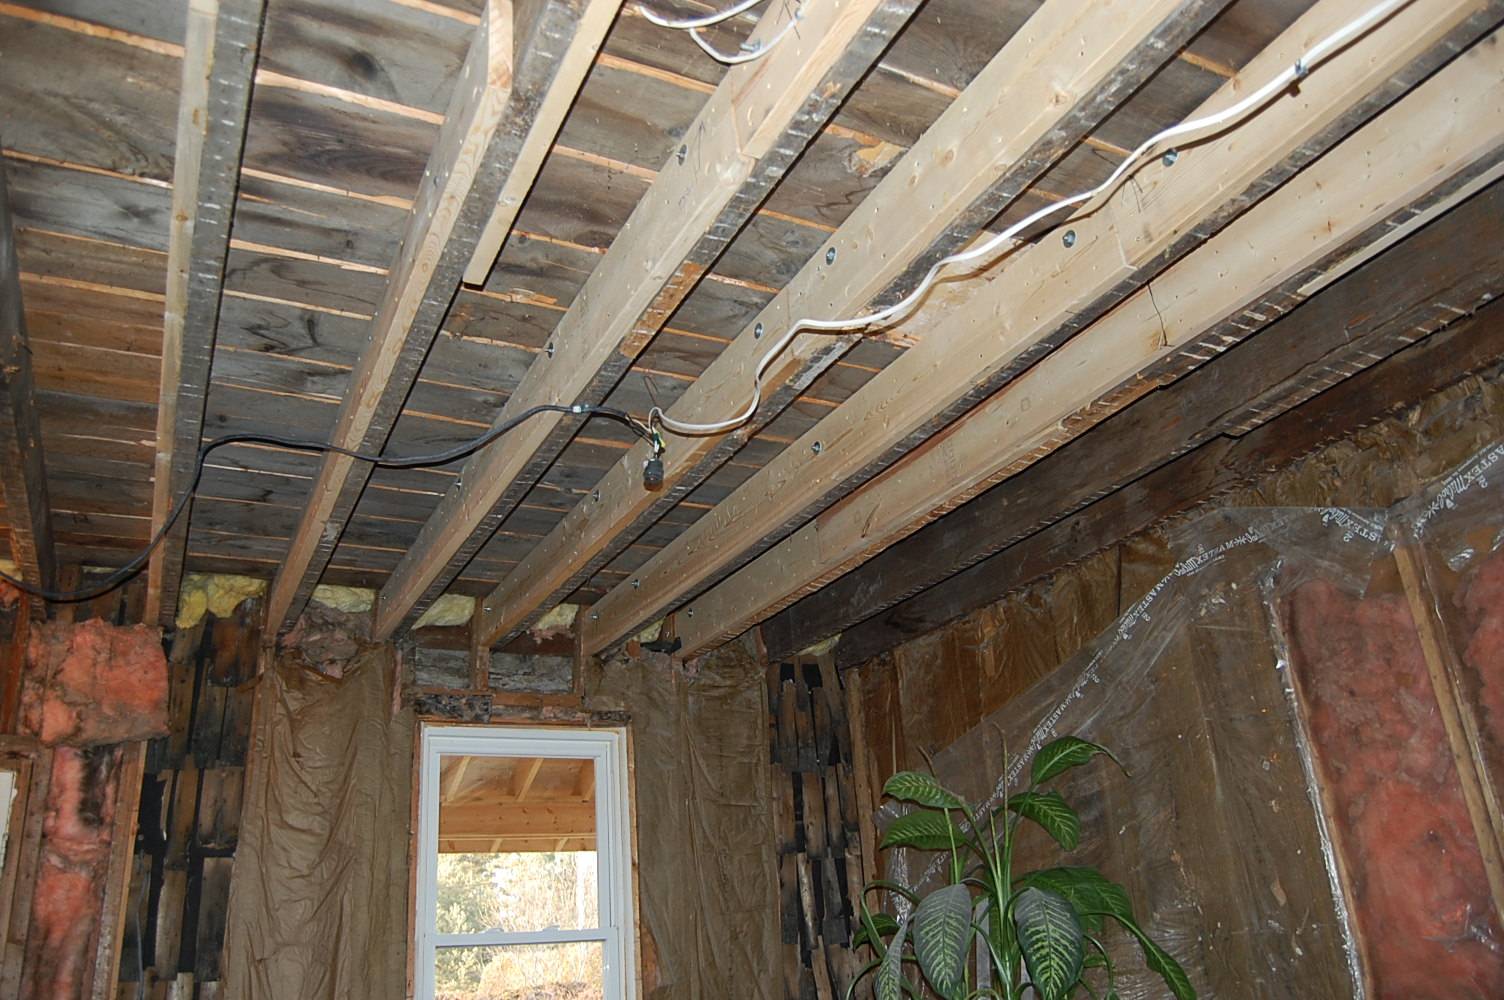 Scabed Ceiling joist